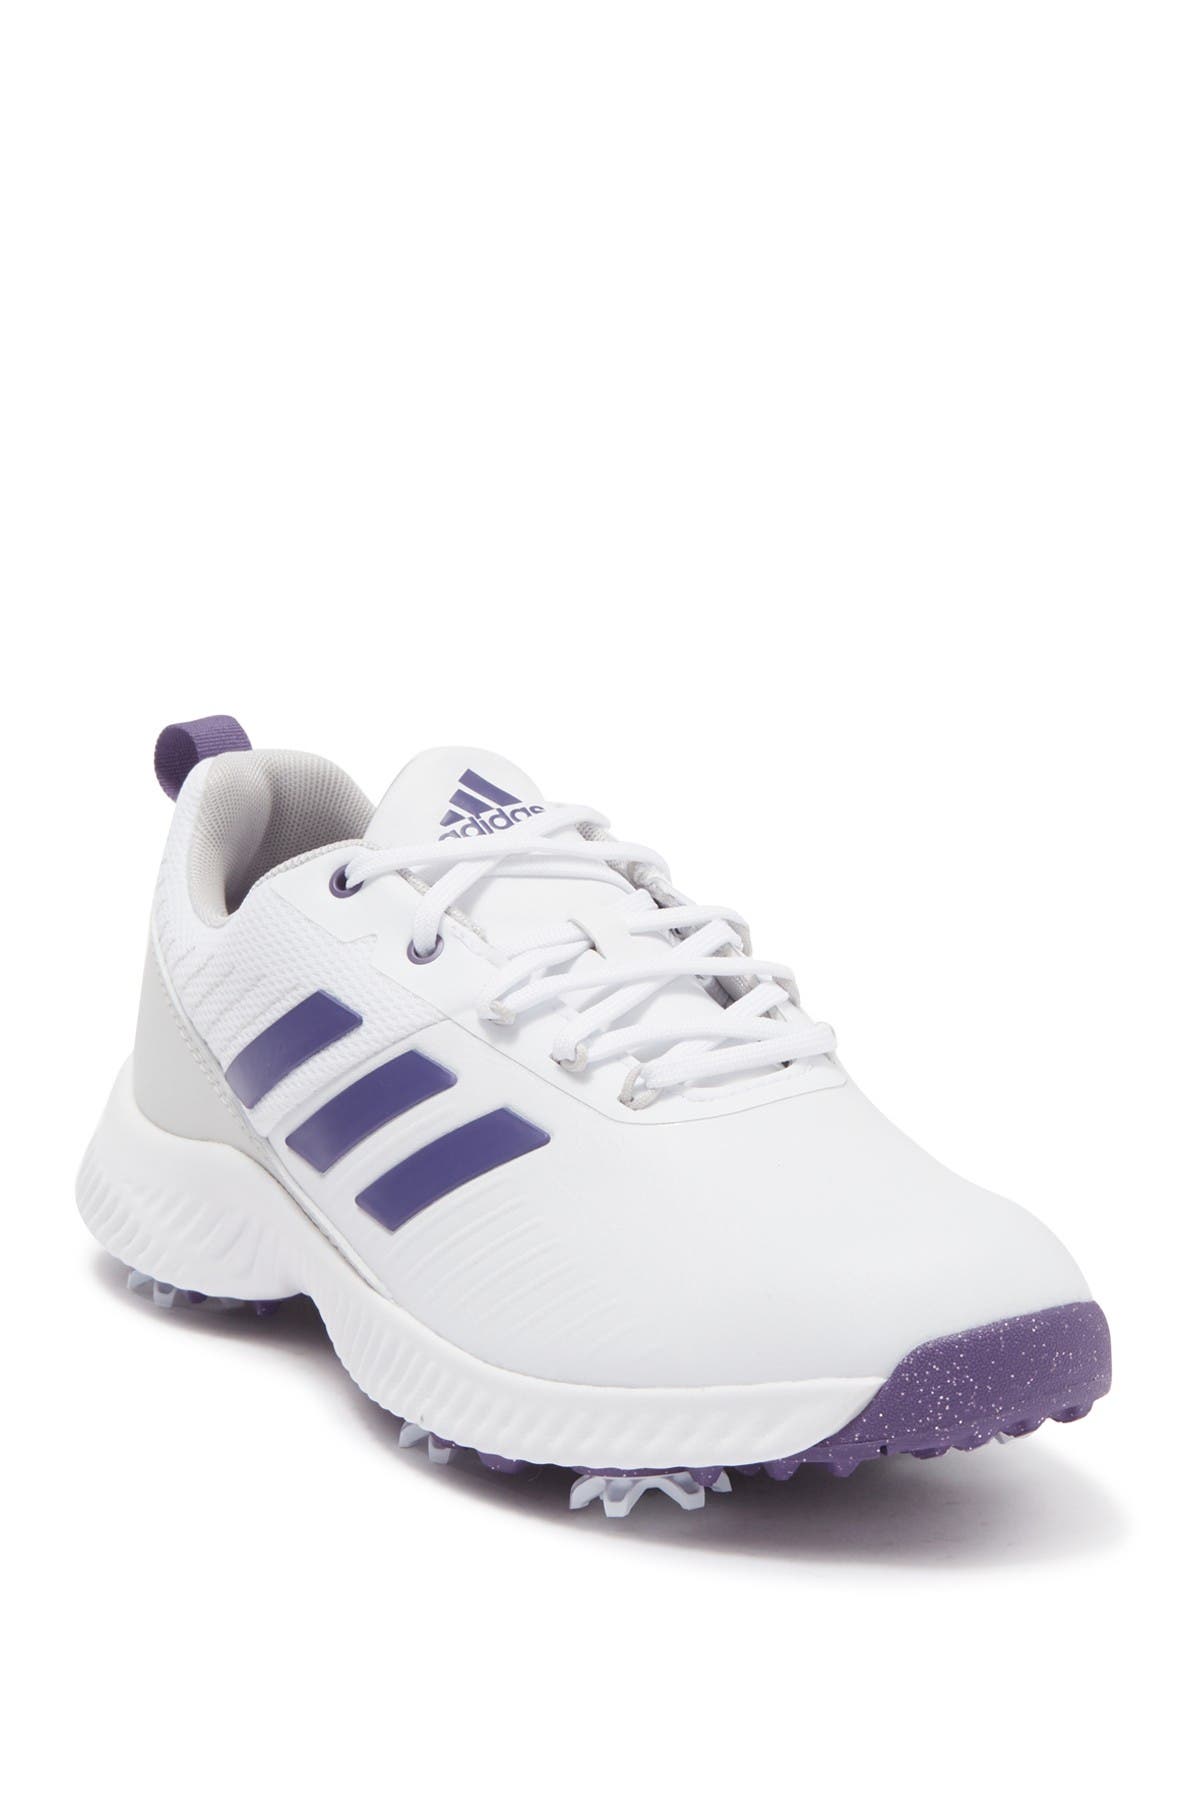 adidas bounce golf shoes